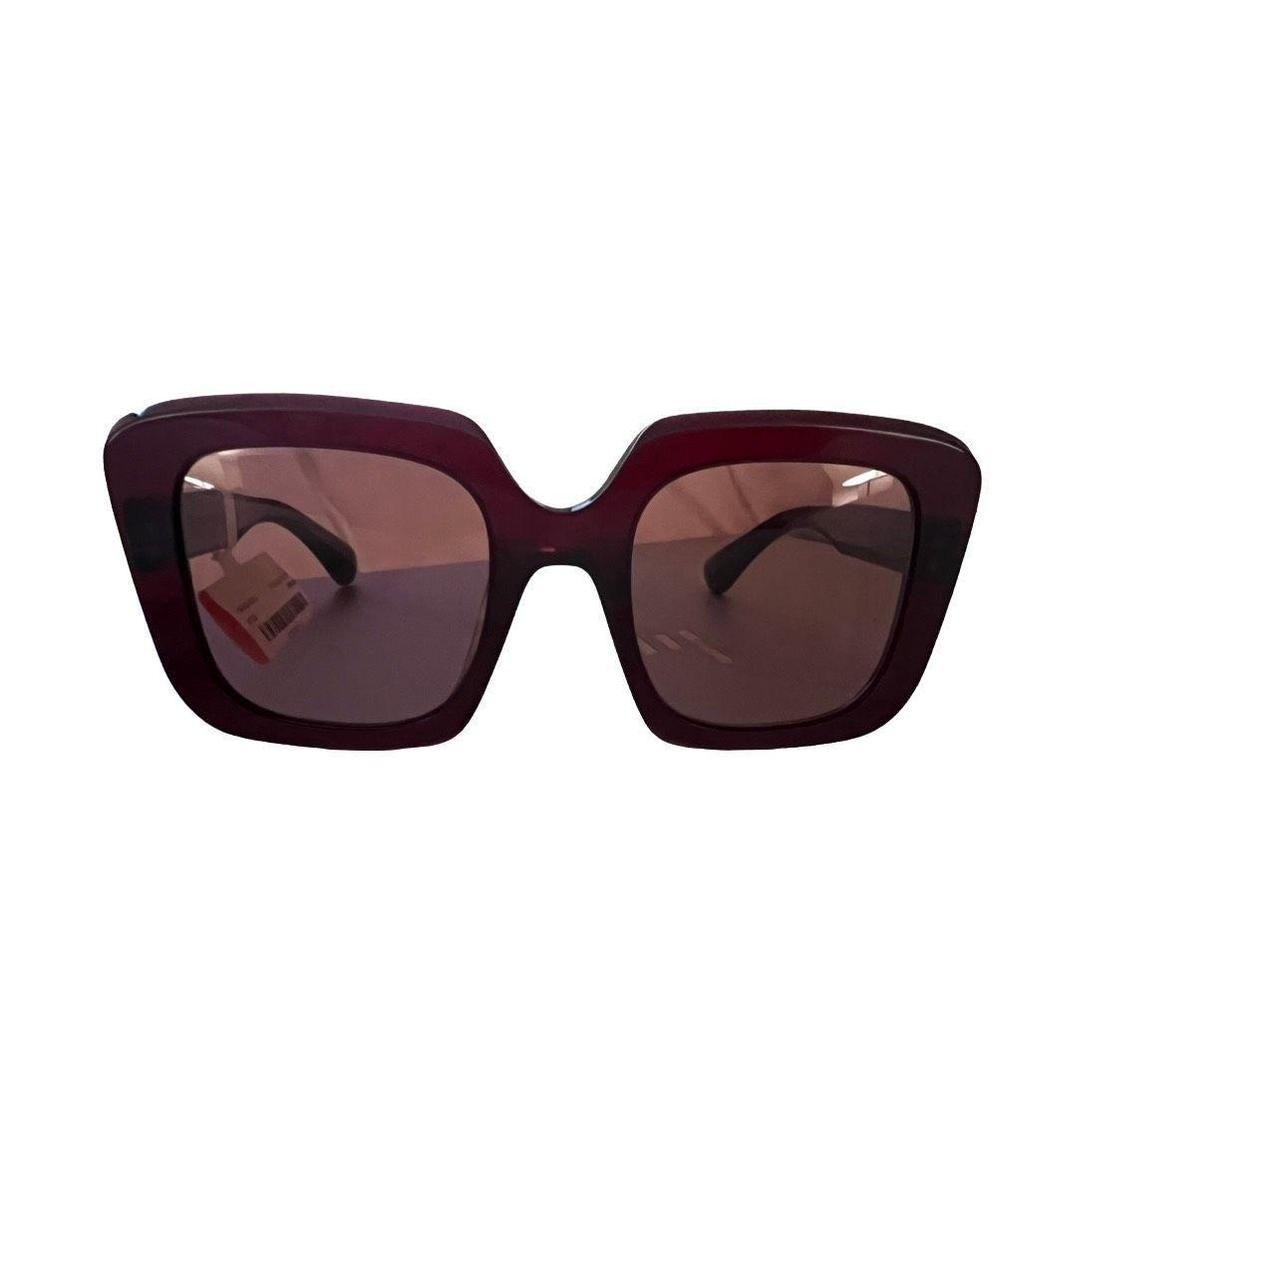 Oliver Peoples Women's Brown and Red Sunglasses